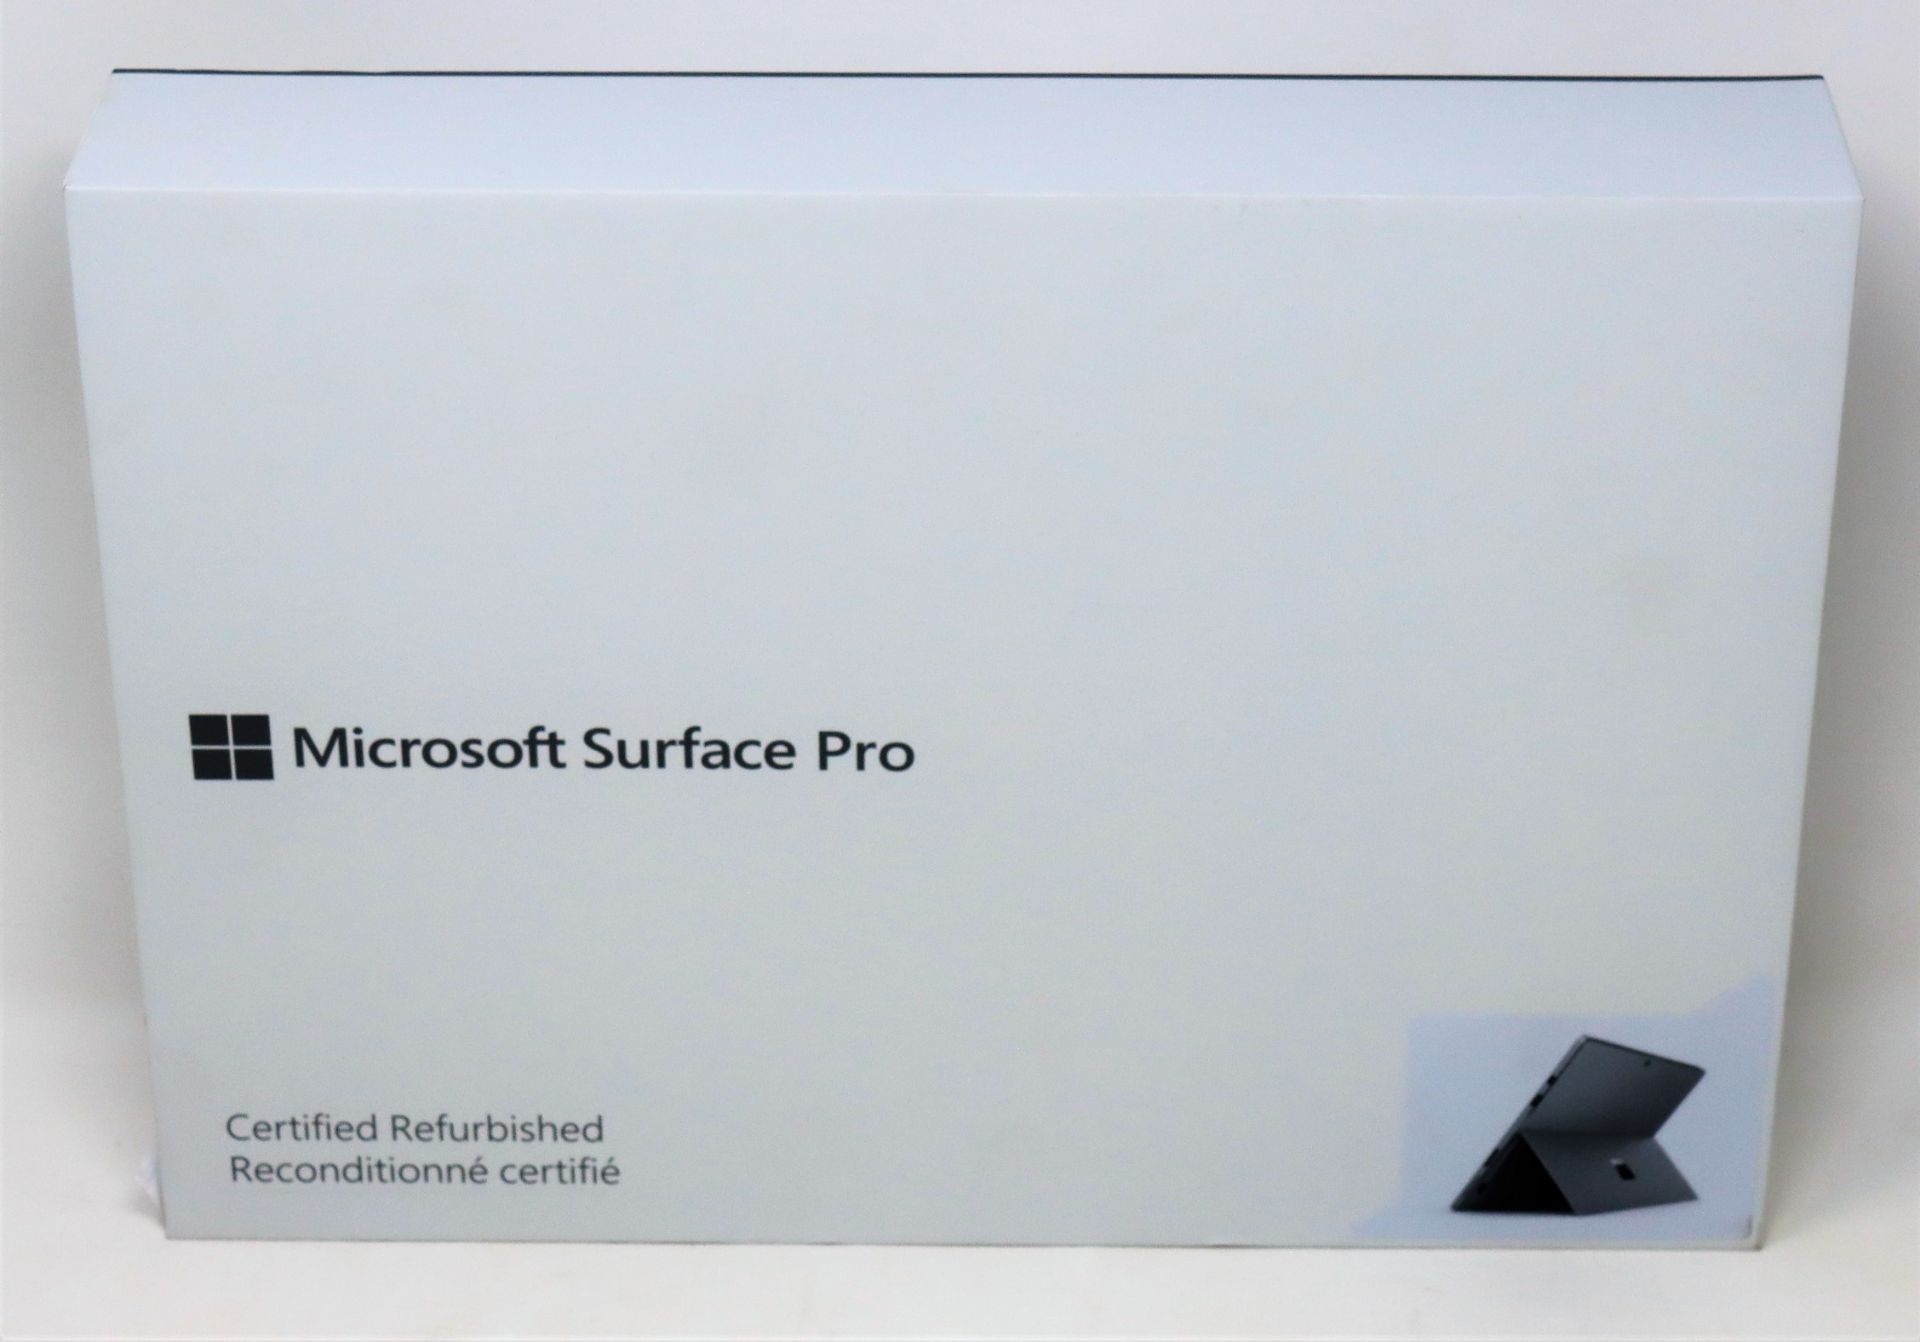 A boxed Certified Refurbished Microsoft Surface Pro 6 with Intel Core i5 8th Gen Processor, 128GB